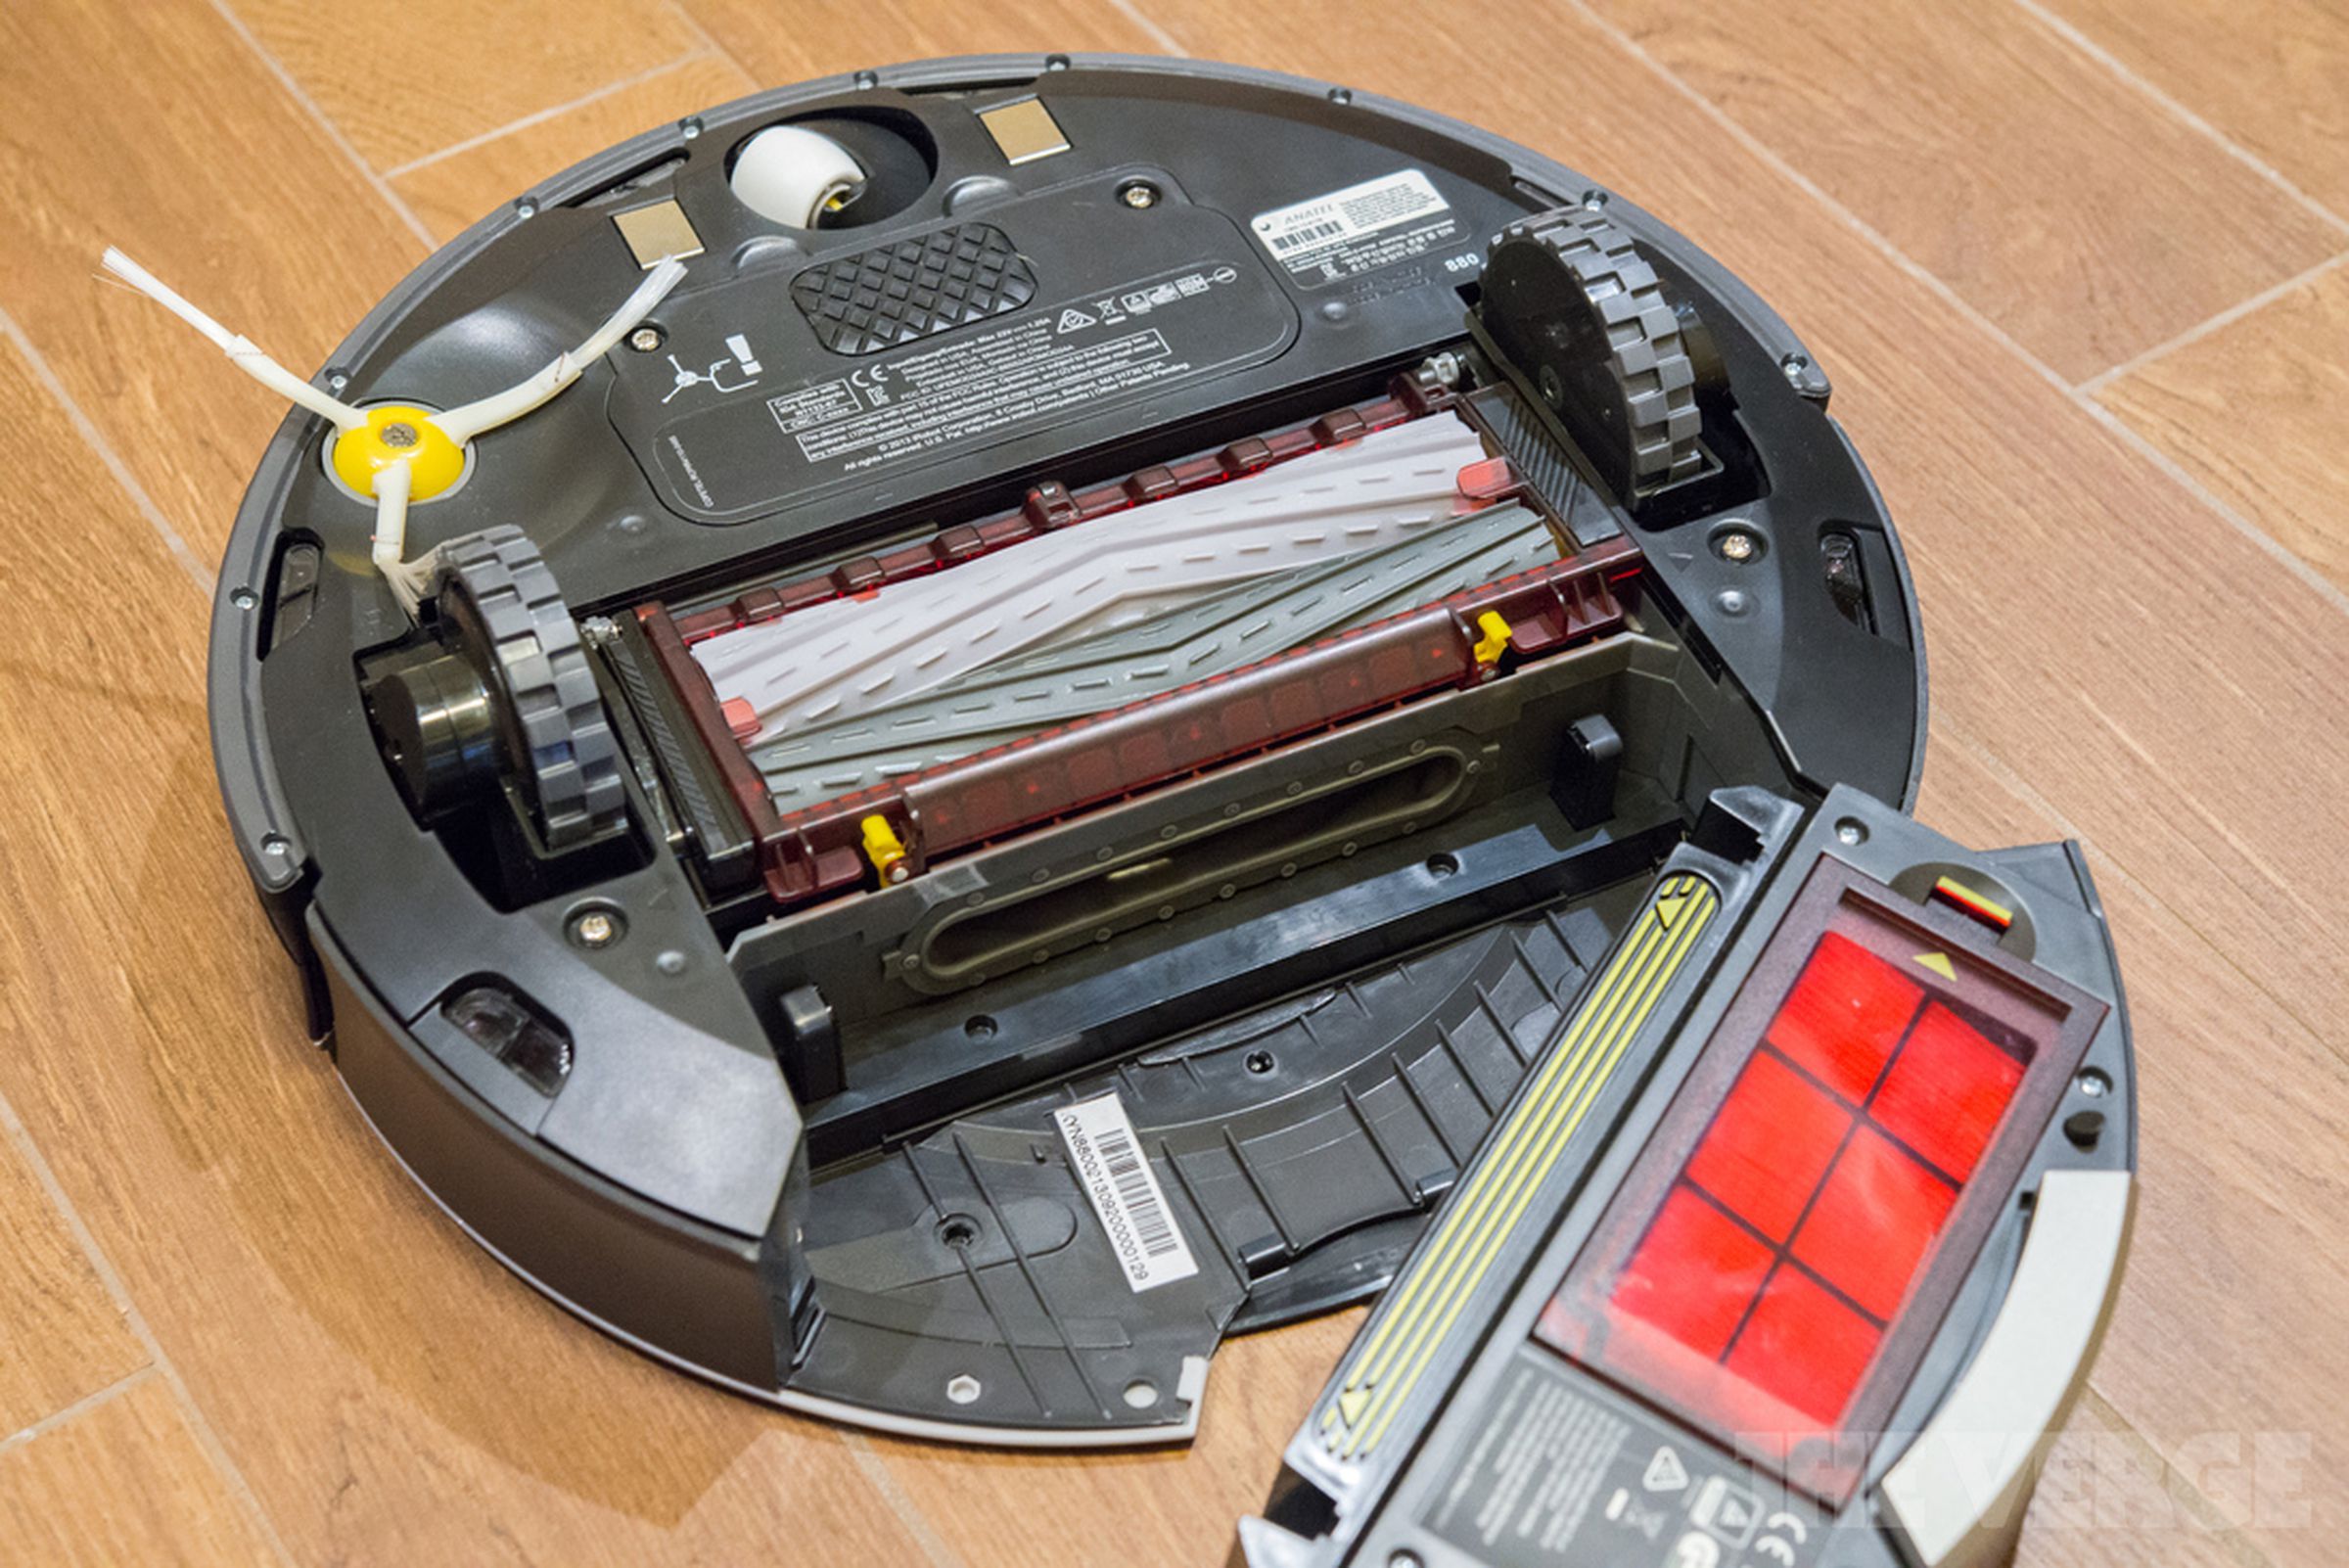 Roomba 880 vacuum cleaning robot hands-on pictures